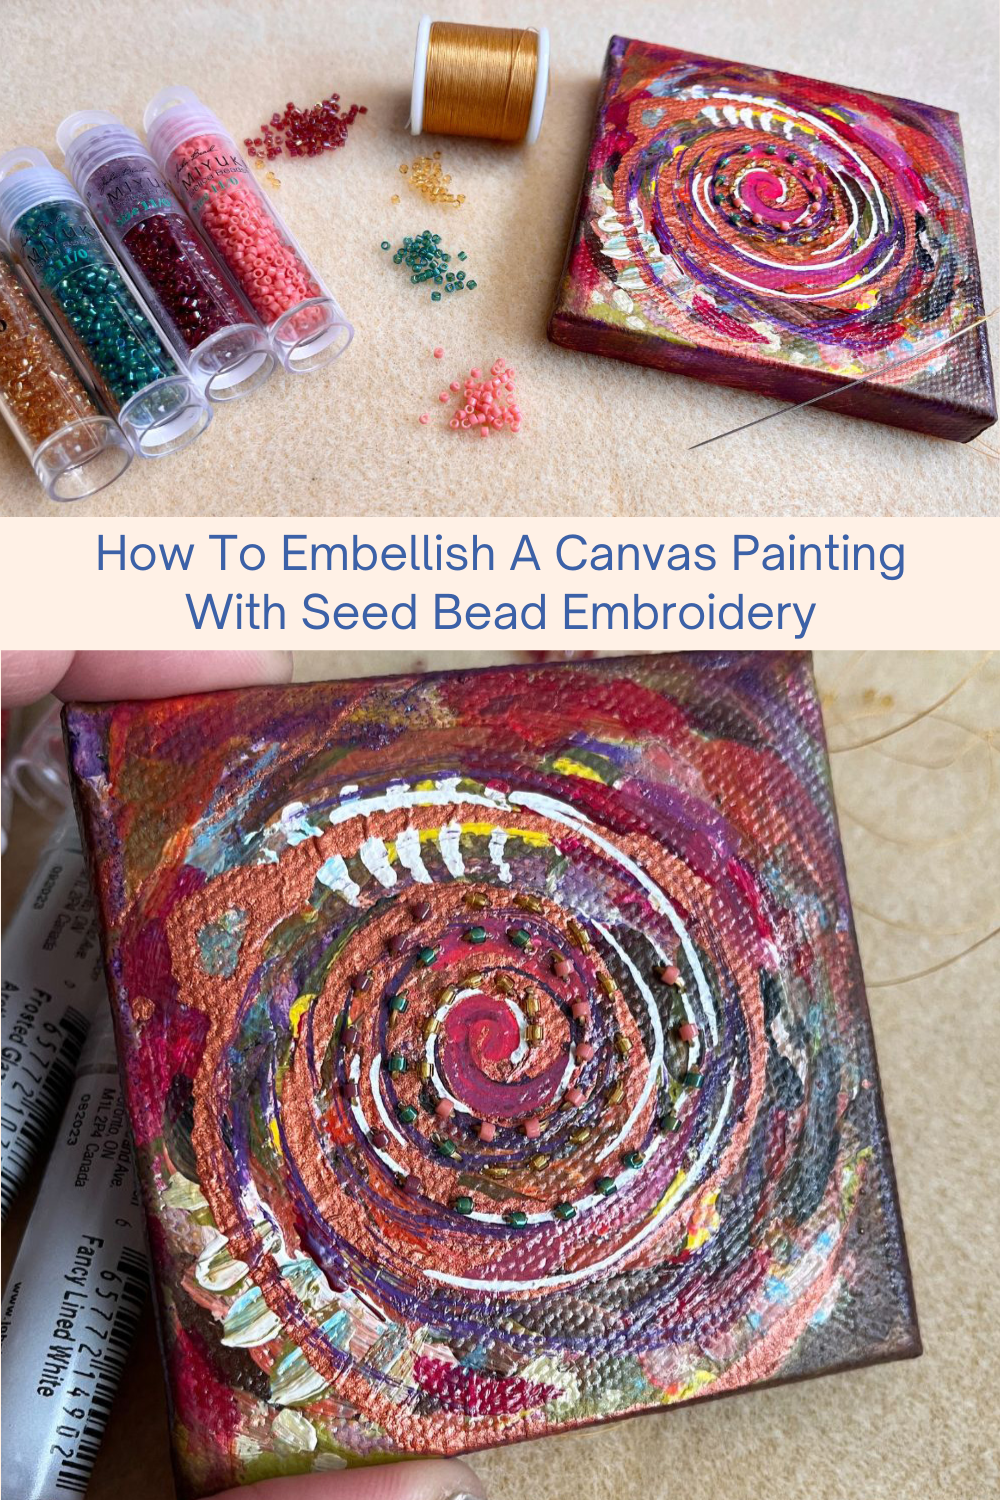 How To Embellish A Canvas Painting With Seed Bead Embroidery Collage